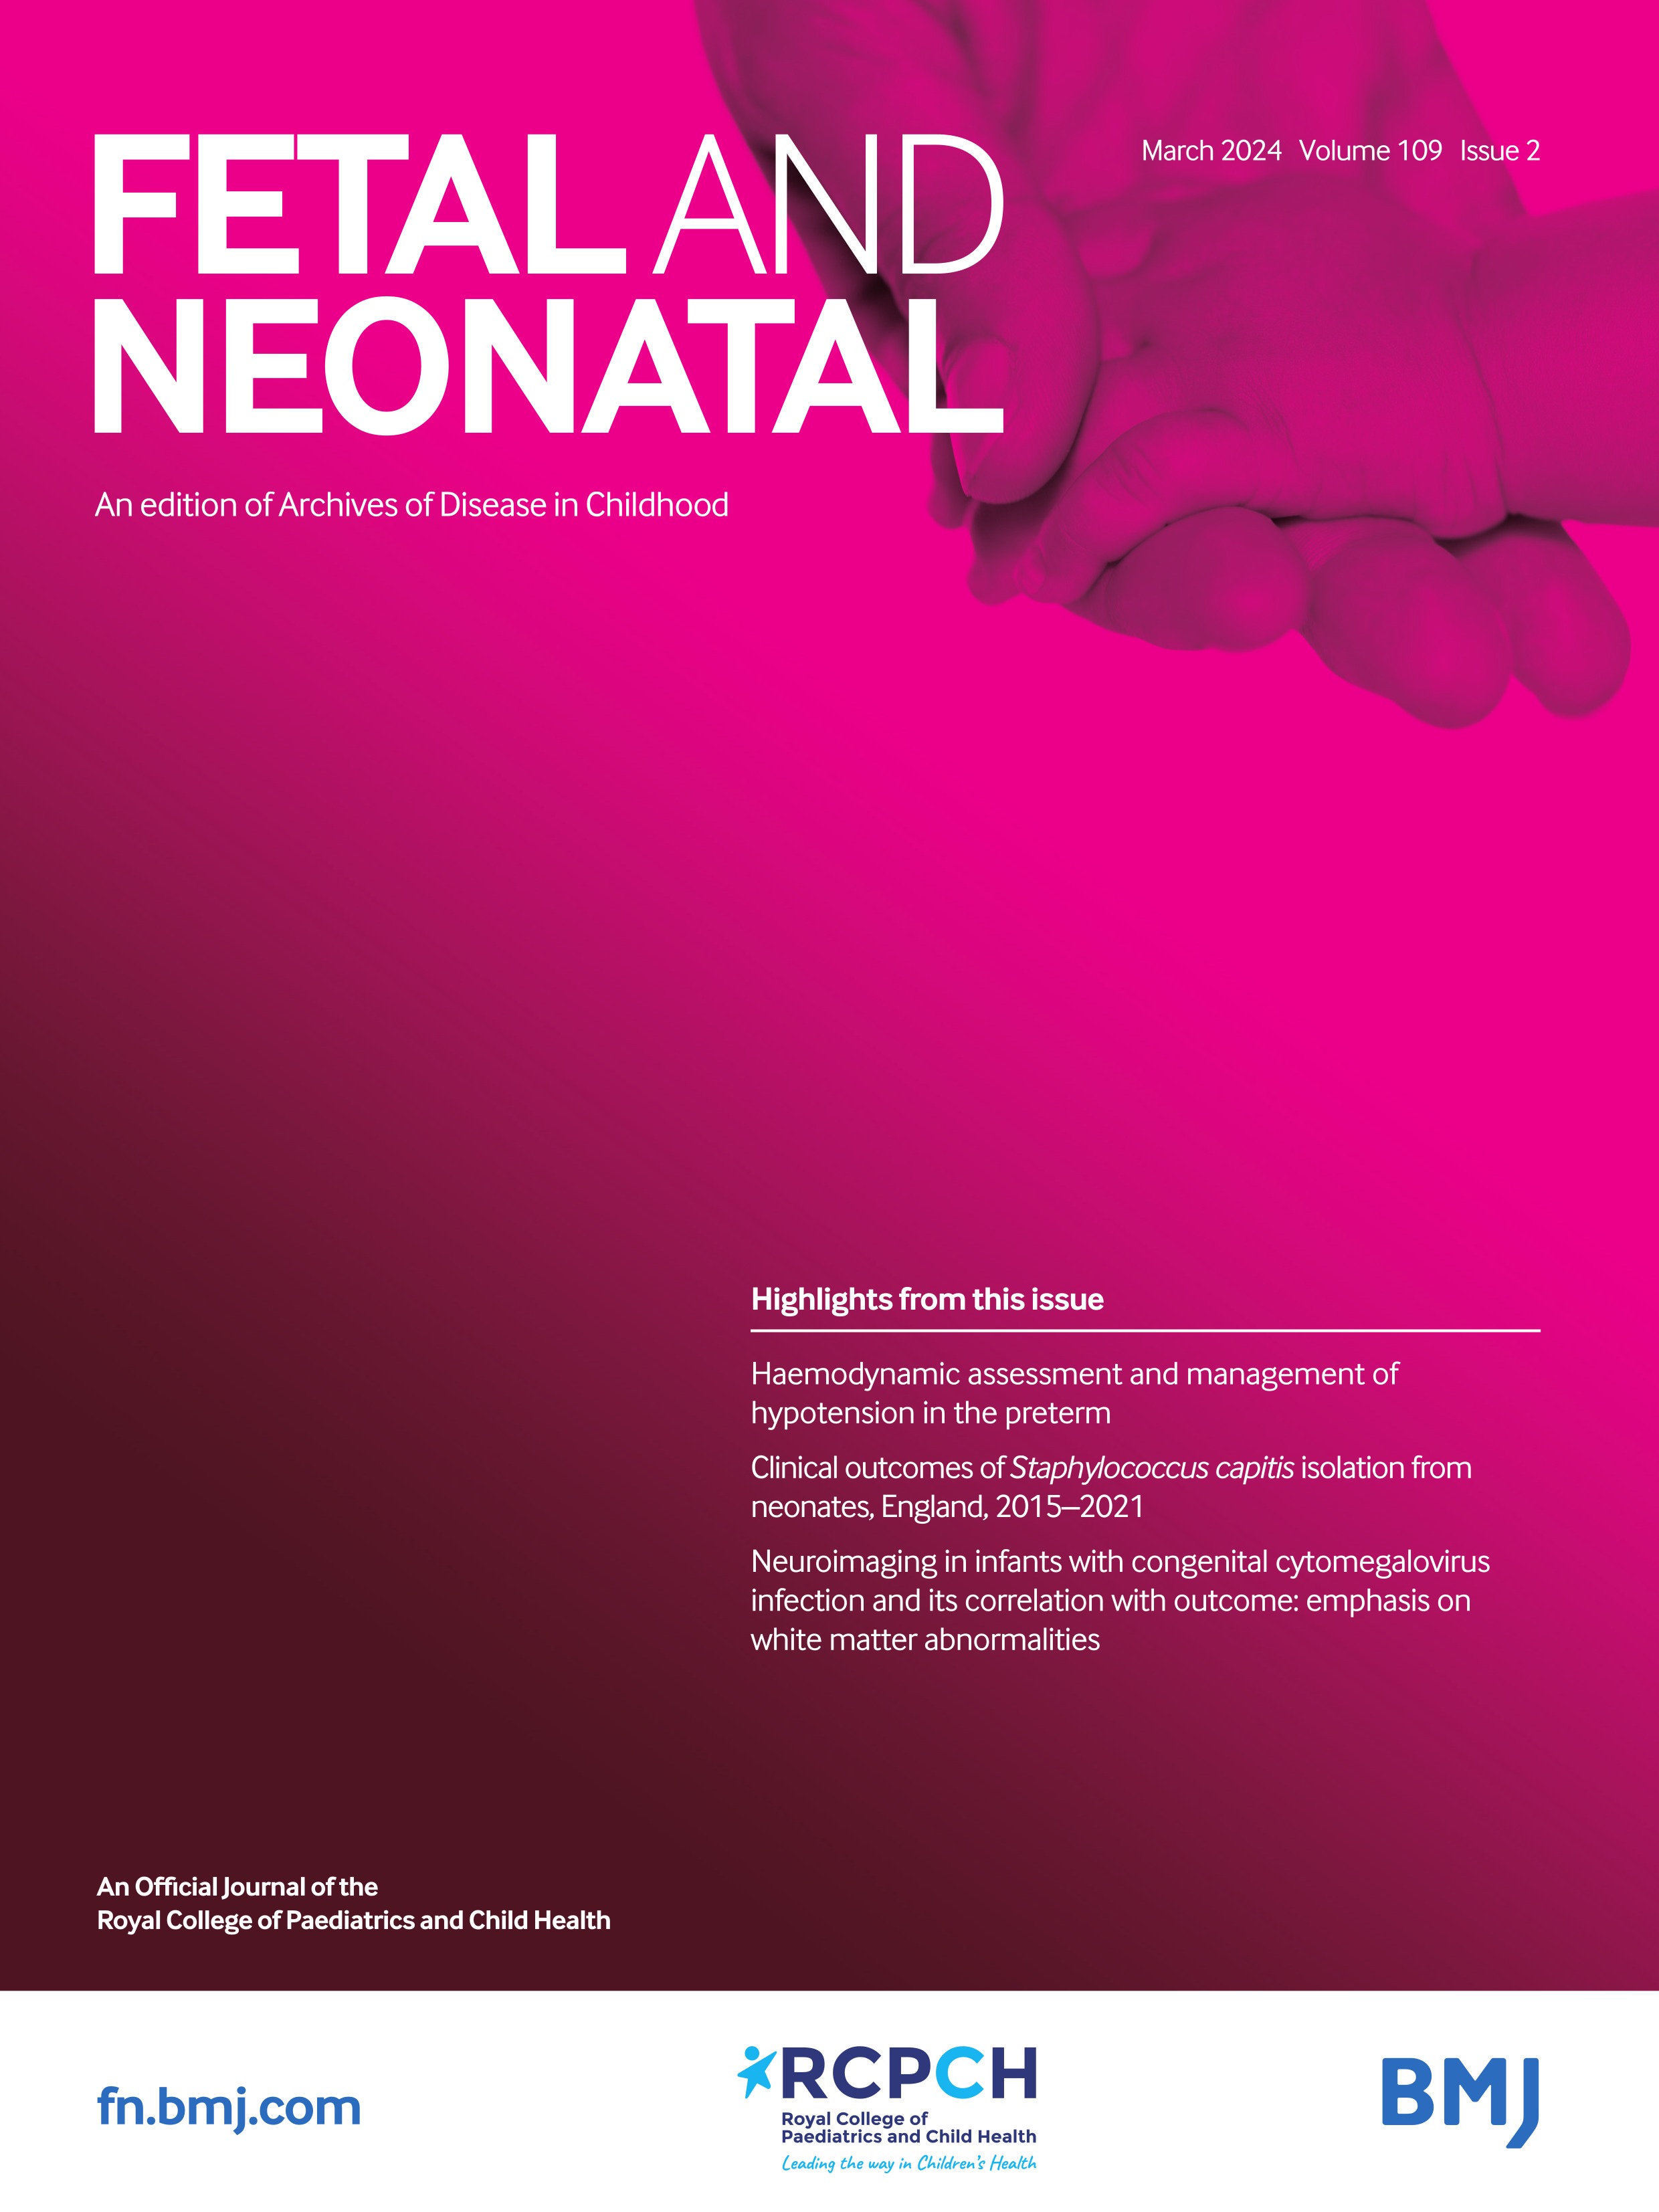 Two-year neurodevelopmental data for preterm infants born over an 11-year period in England and Wales, 2008-2018: a retrospective study using the National Neonatal Research Database